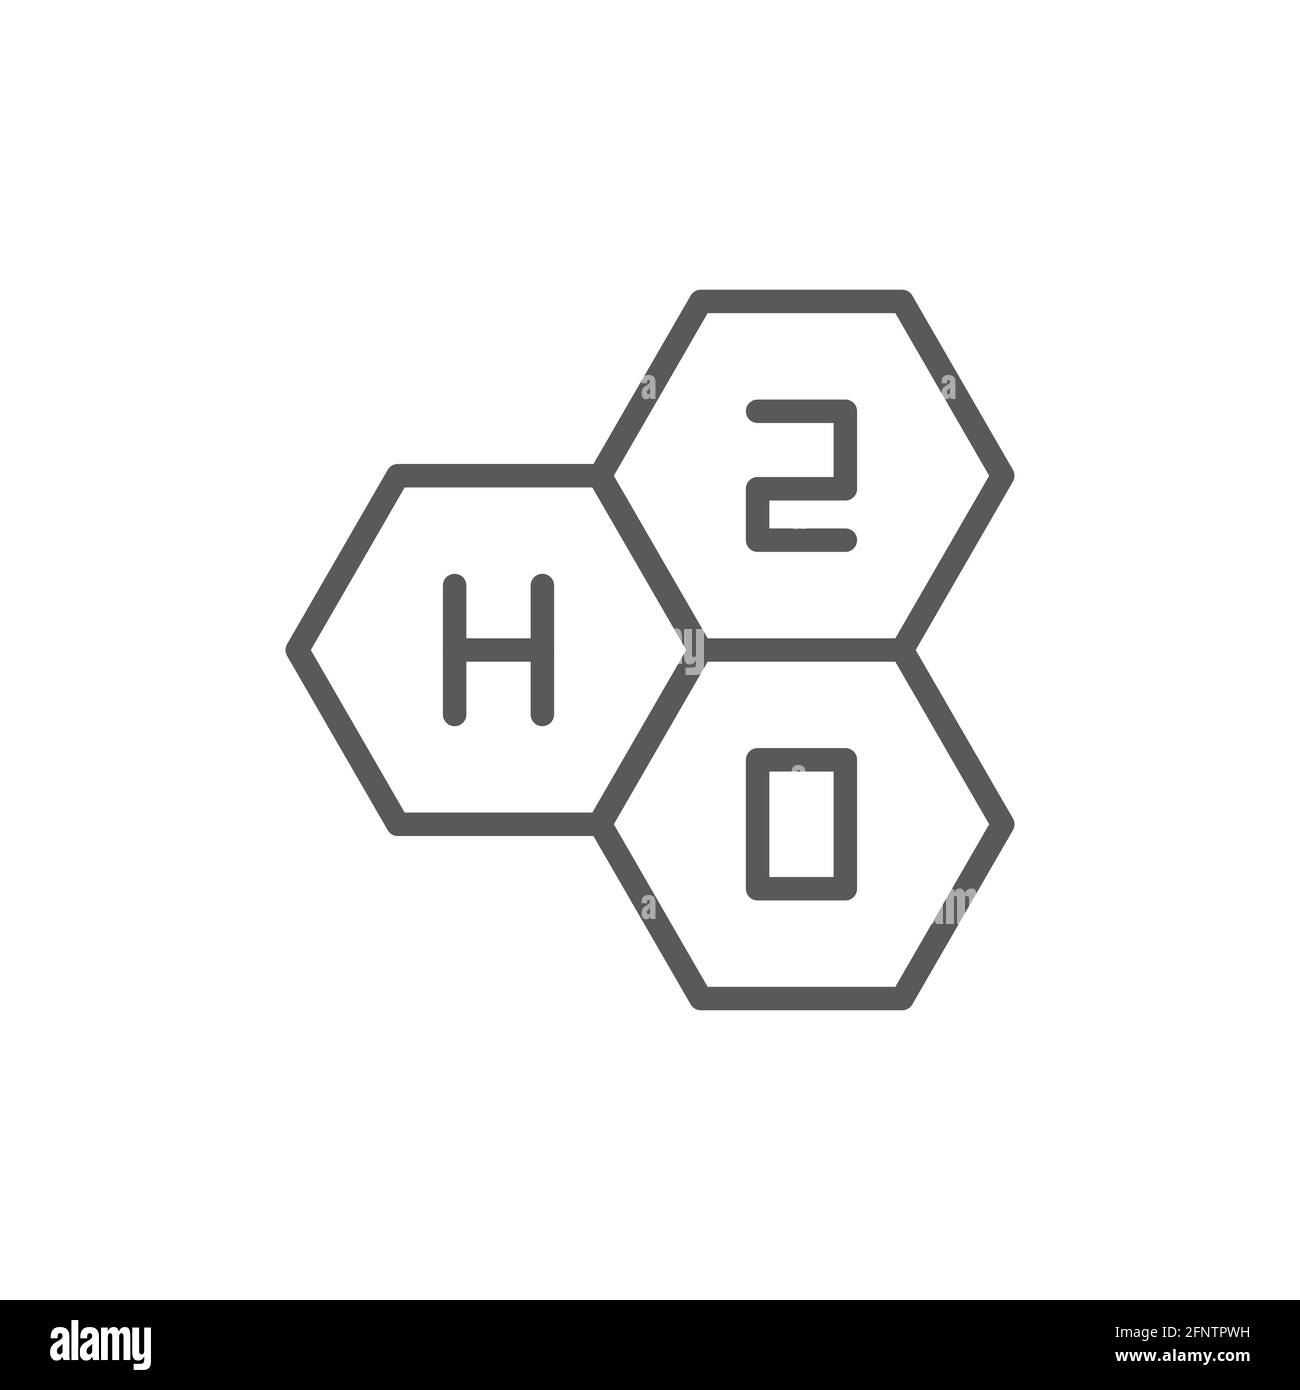 Hydrogen Oxygen Cut Out Stock Images & Pictures - Alamy